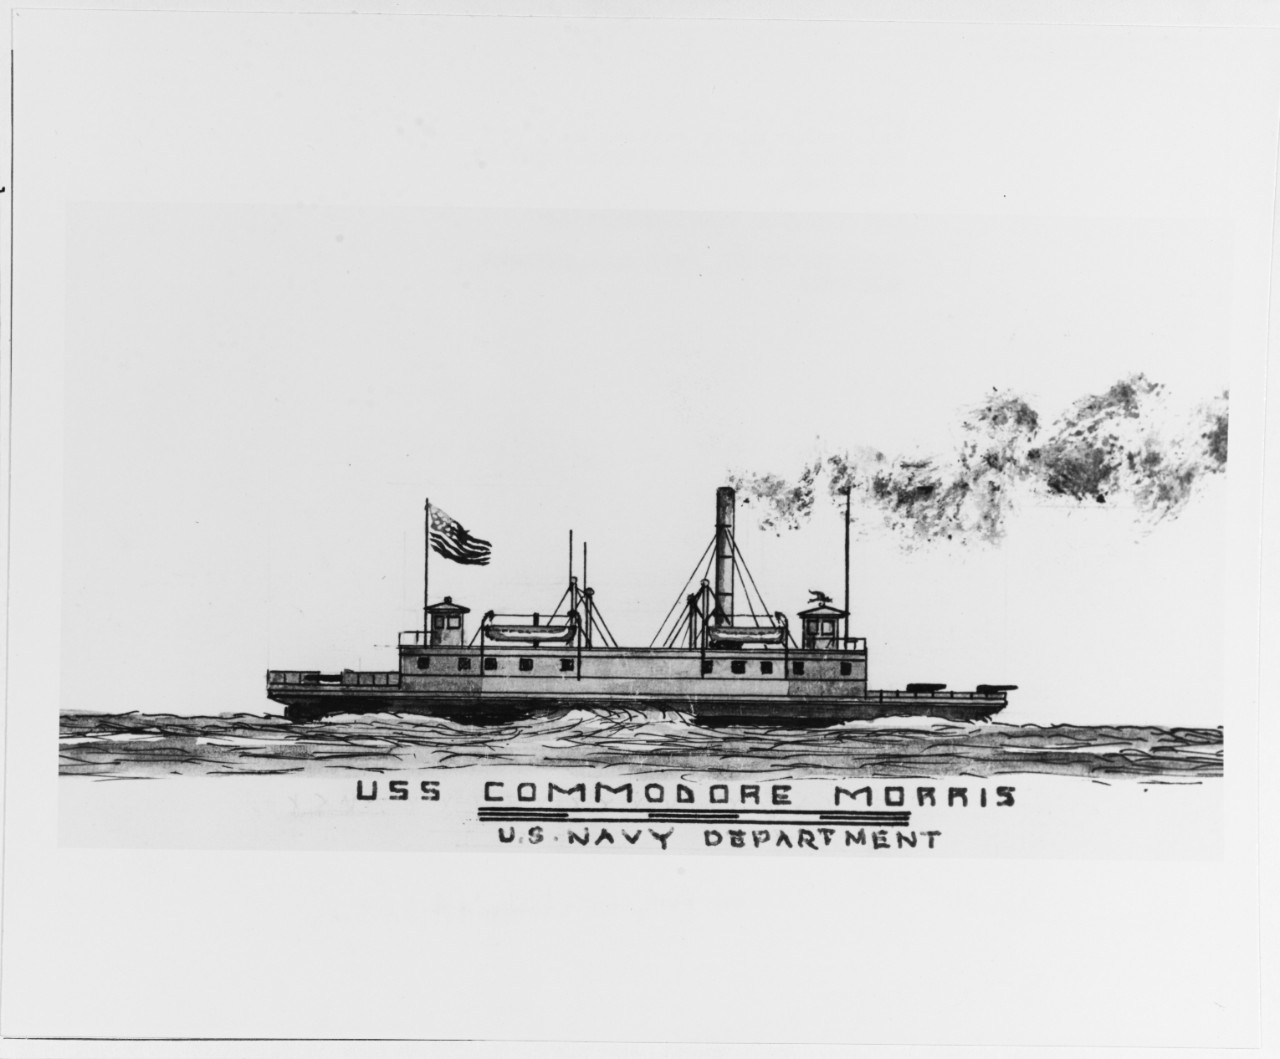 COMMODORE MORRIS (naval and merchant steamer, 1862-1931)